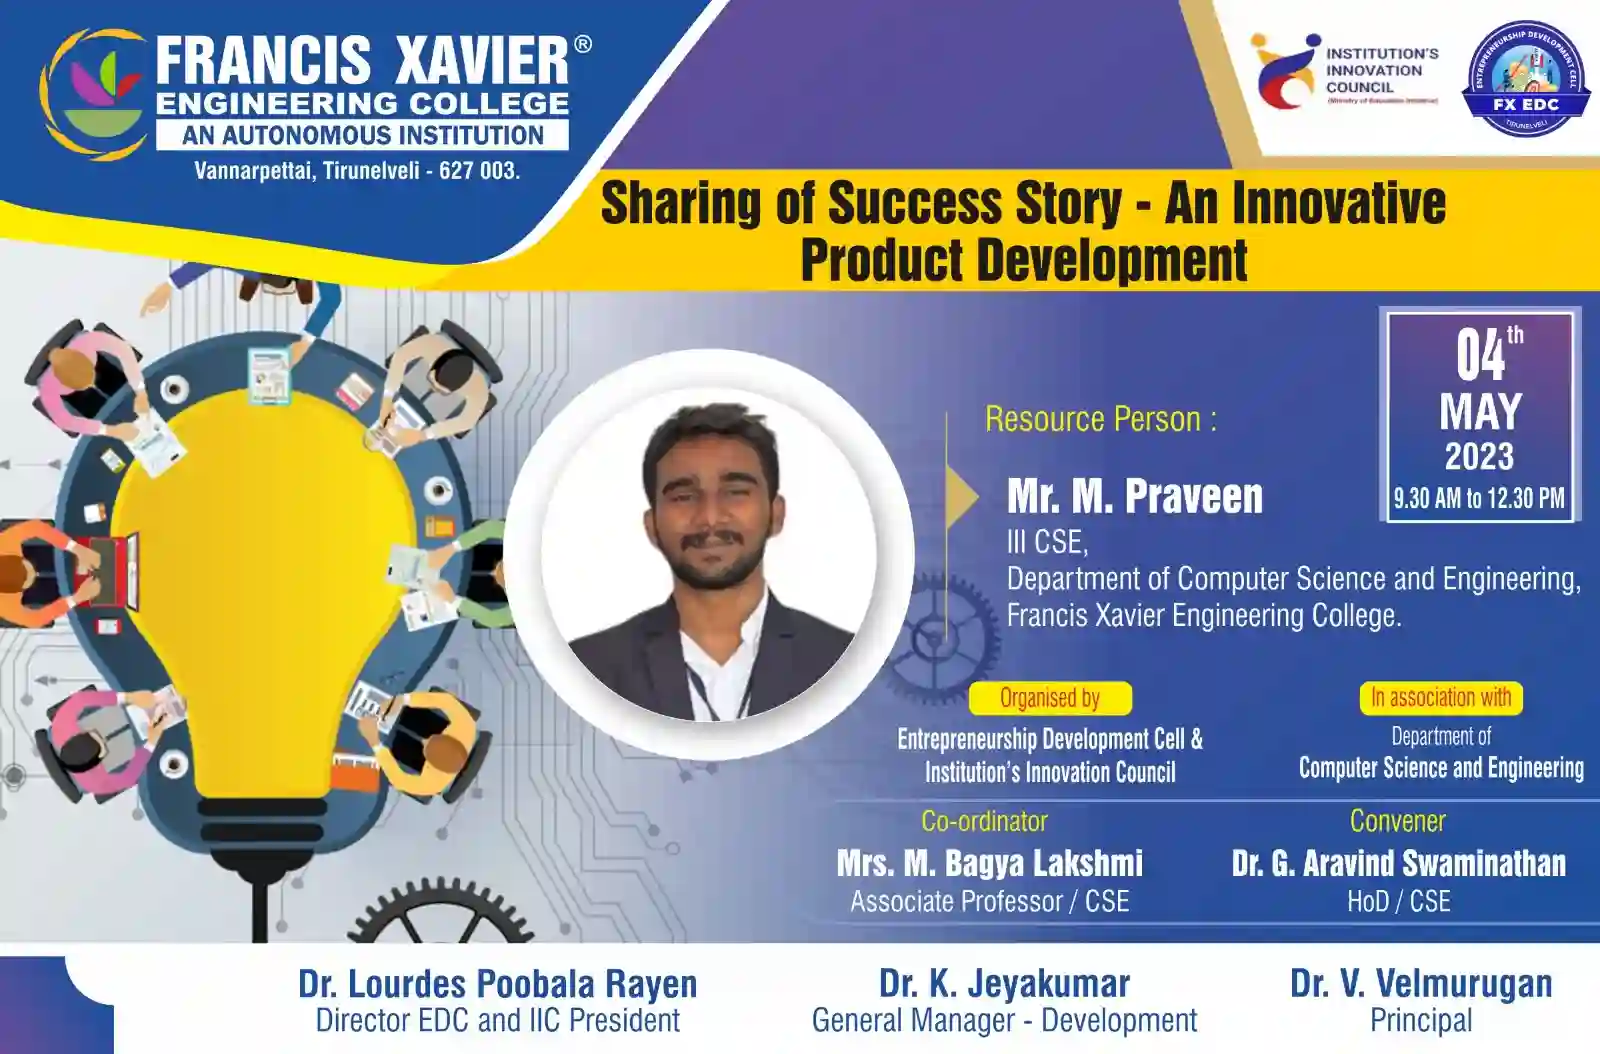  Sharing of Success Story - An Innovative Product Development